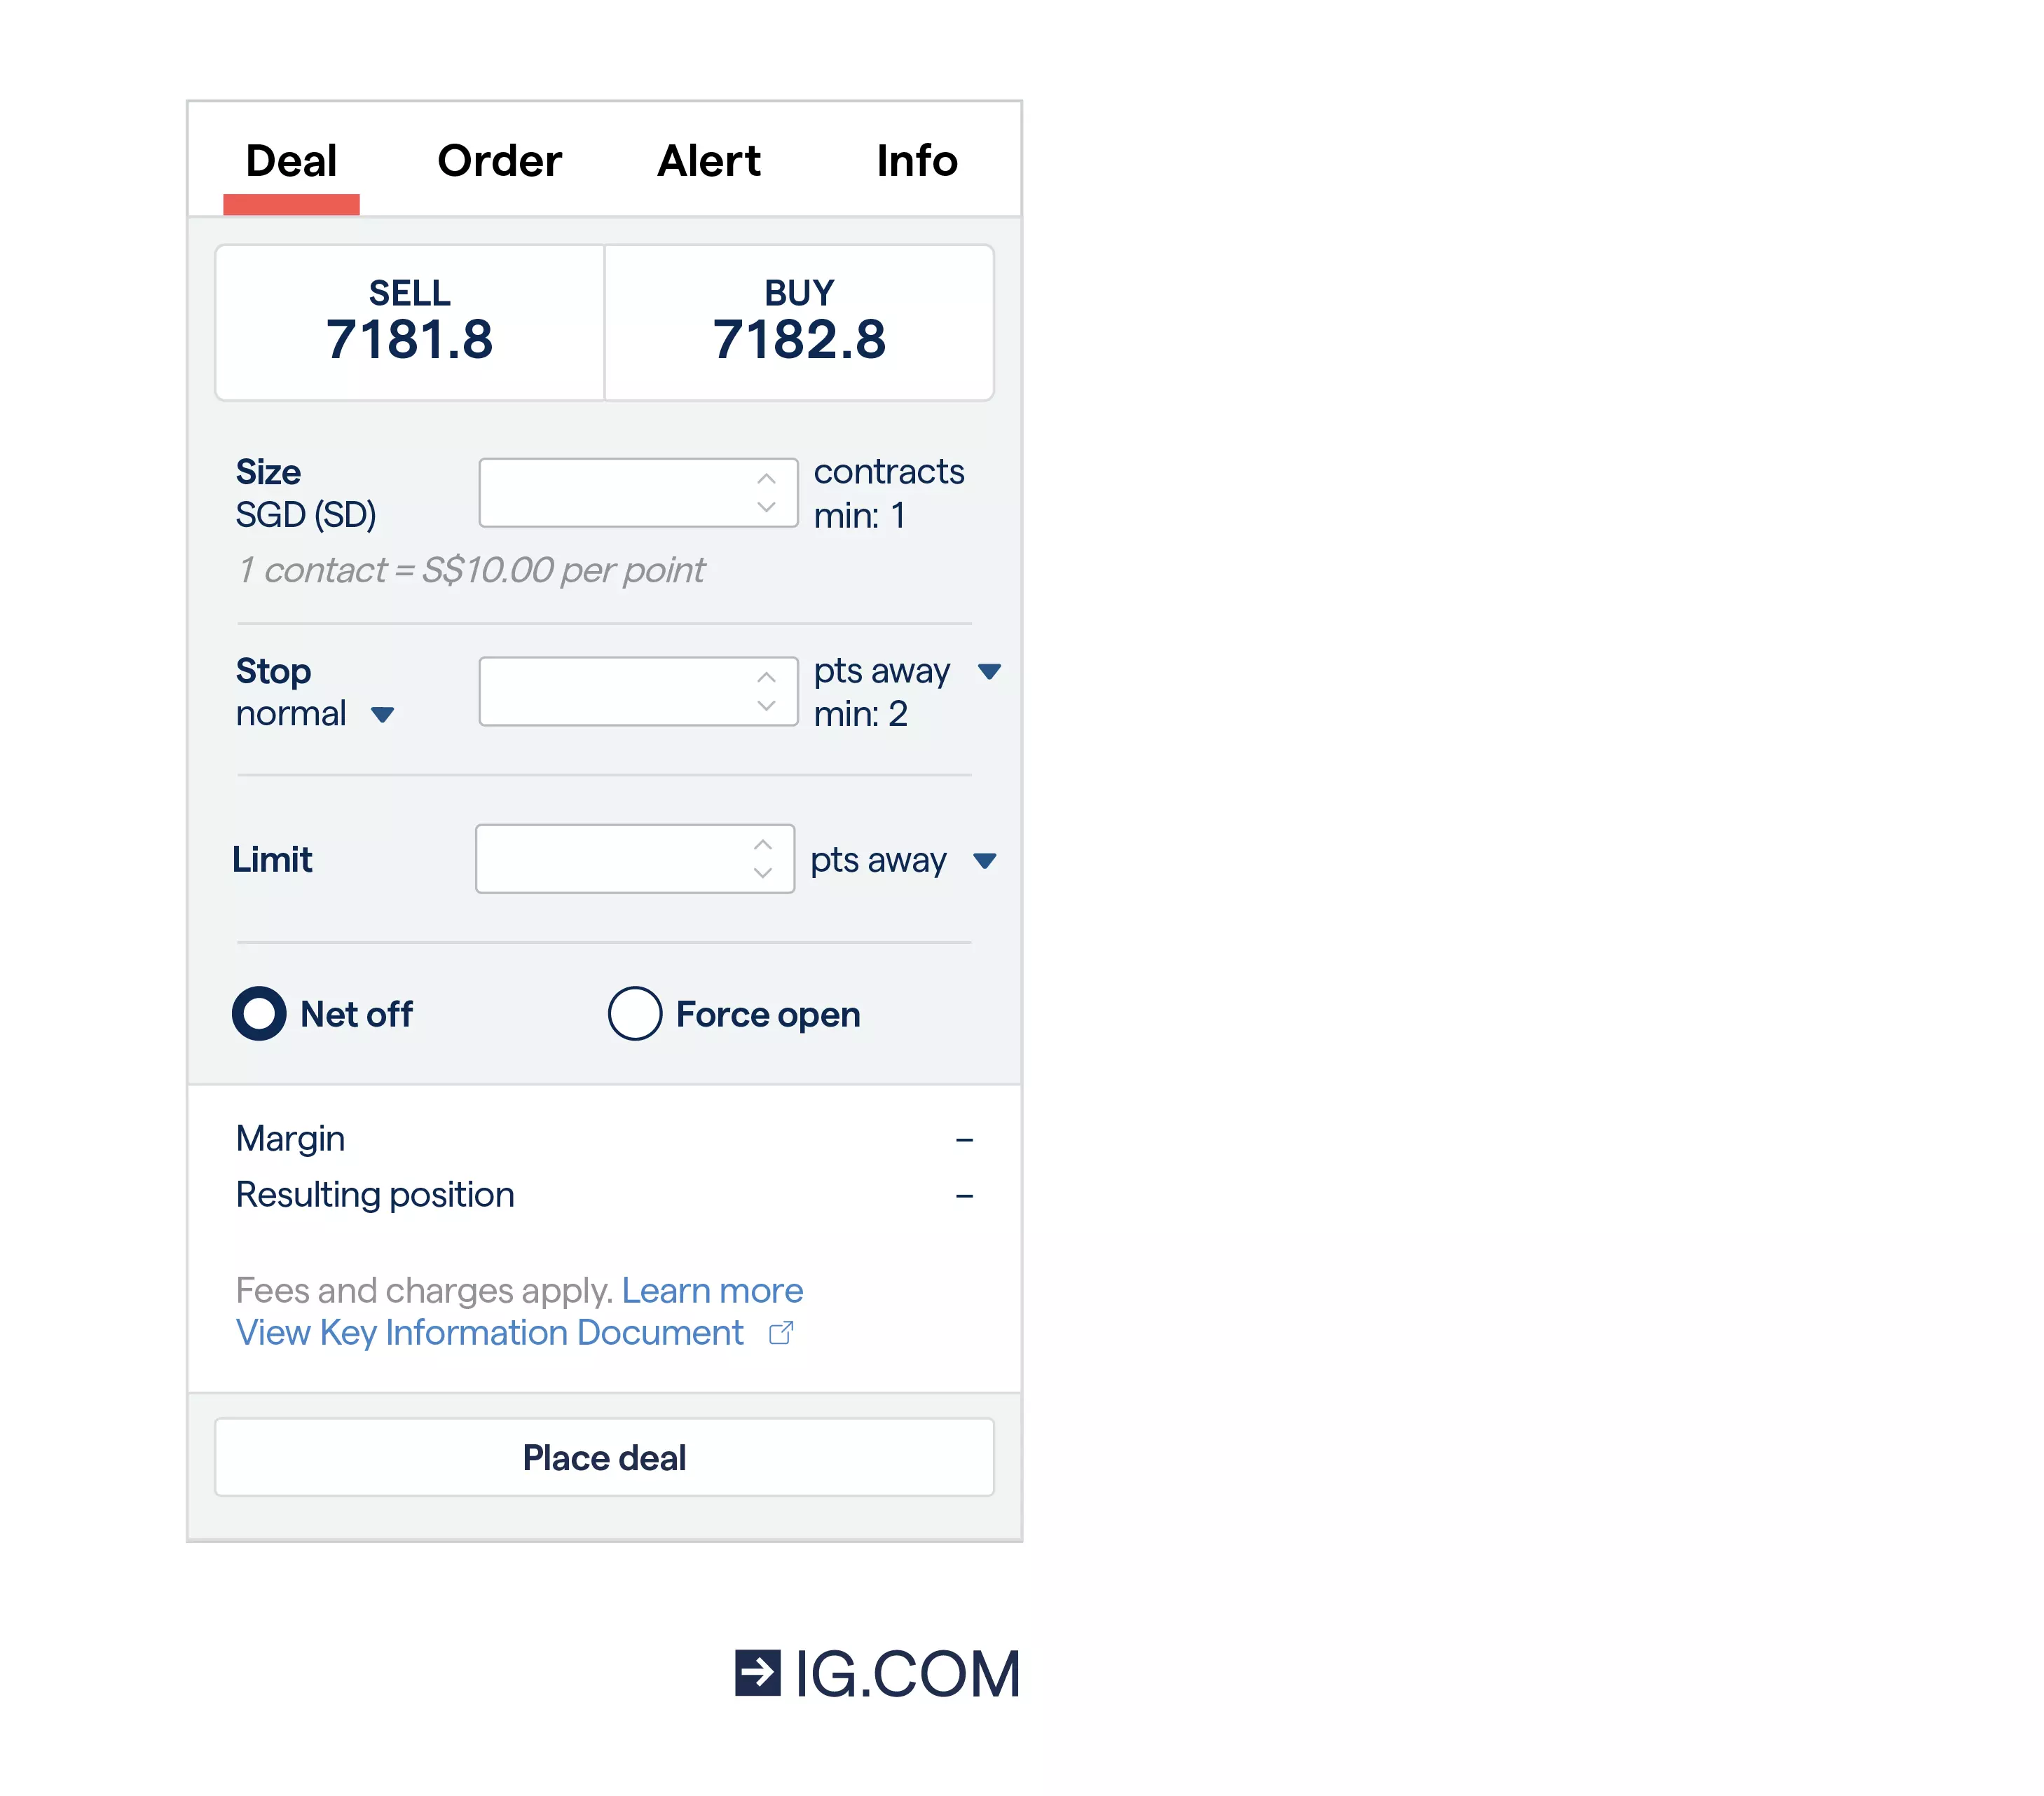 The deal ticket of a CFD trading account showing how to place a market order